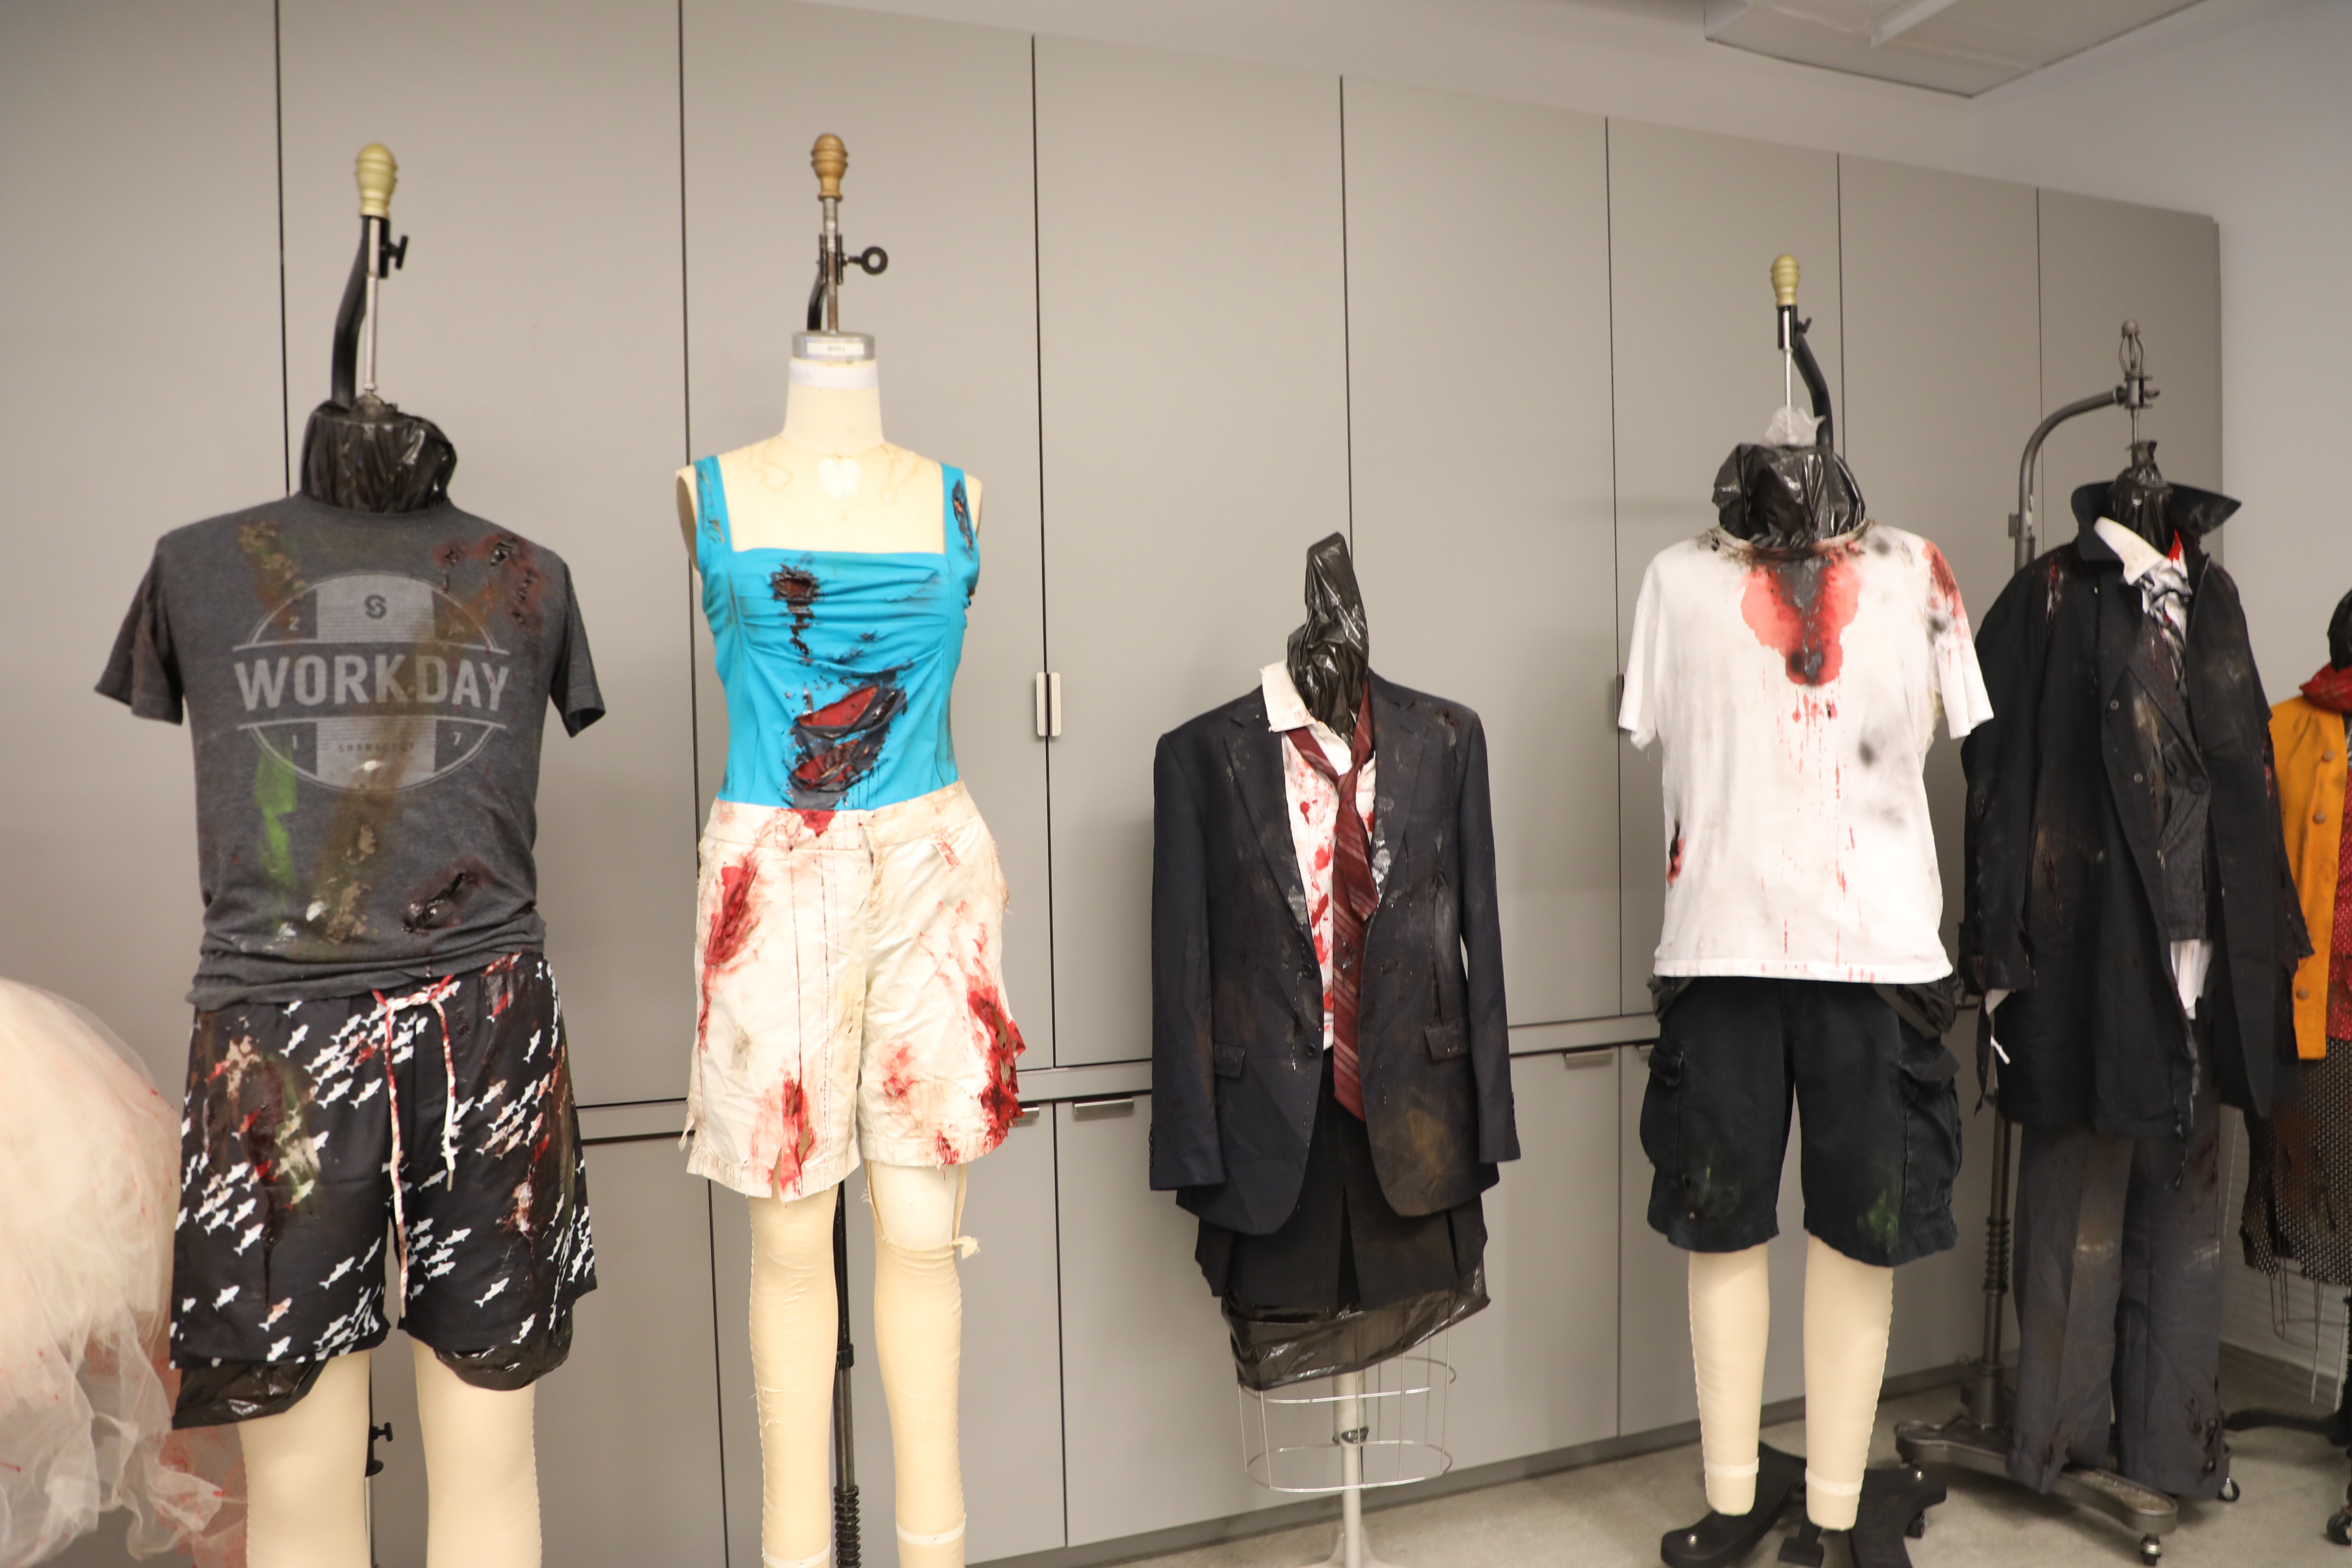 several zombie costumes